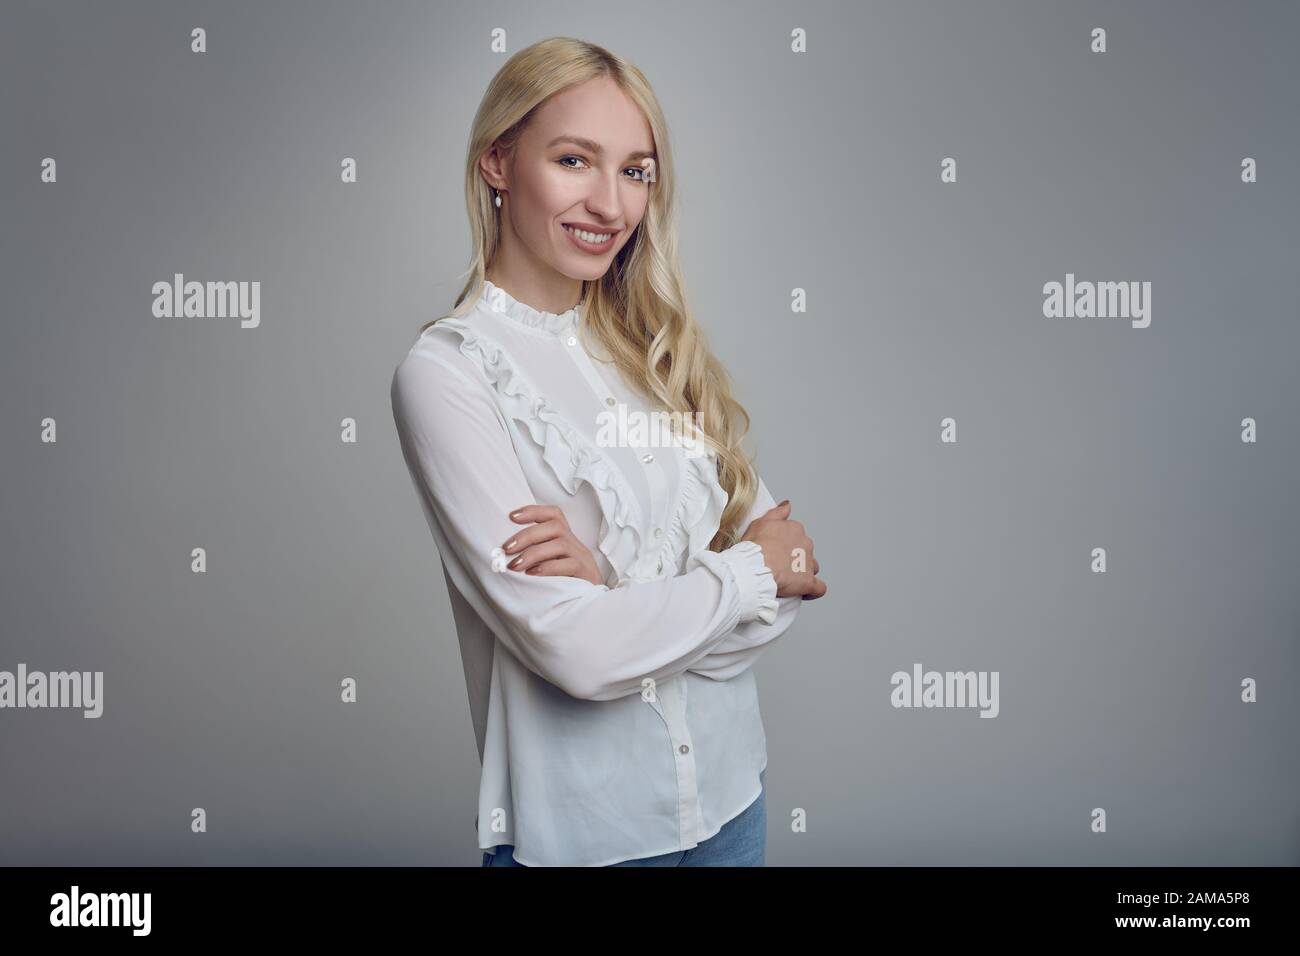 Young and beautiful long-haired blond woman in white blouse standing with her arms folded and looking at camera with a smile. Stock Photo